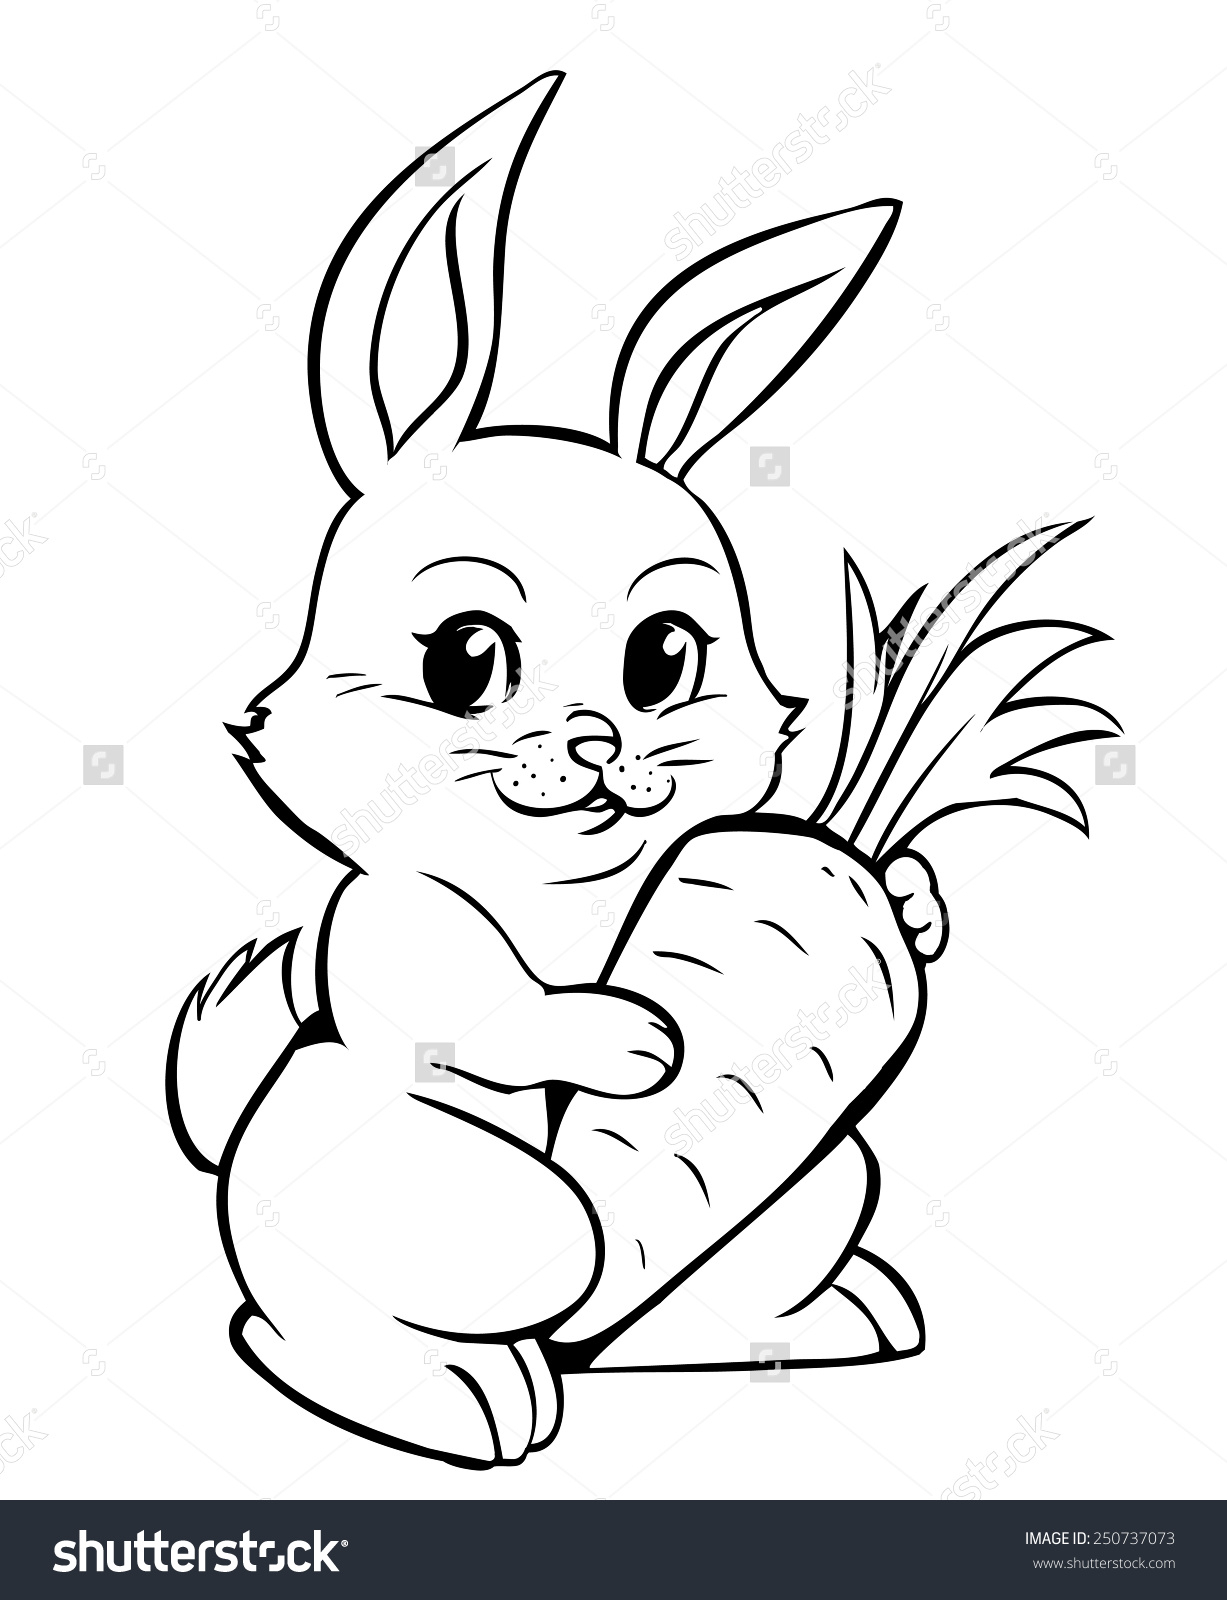 Rabbit Drawing Outline at GetDrawings | Free download